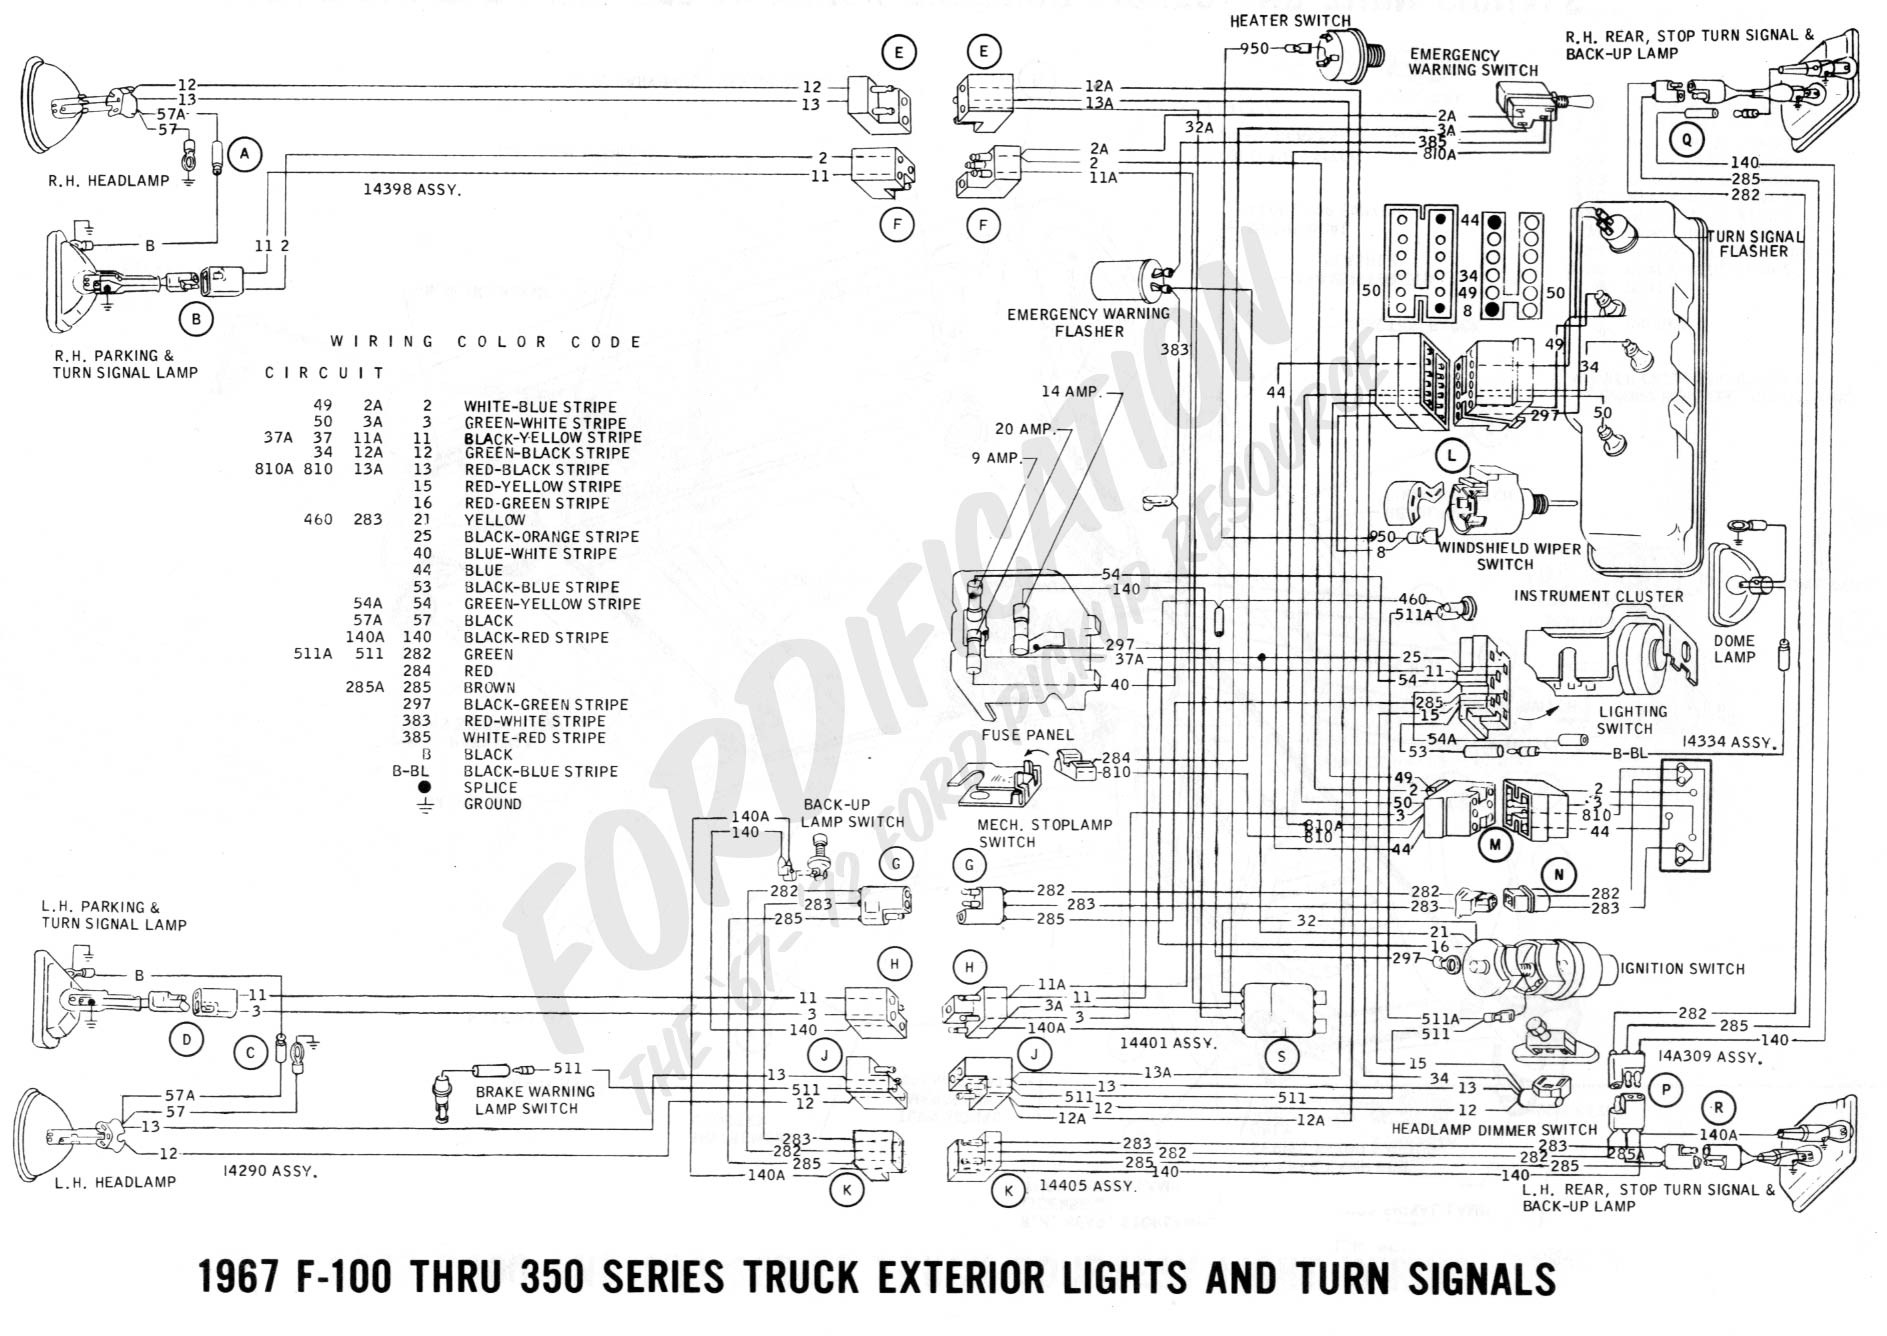 67 72 Chevy Truck Wiring Diagram ford F100 Wiring 1966 ford F100 Wiring Diagram Wiring Diagrams Of 67 72 Chevy Truck Wiring Diagram